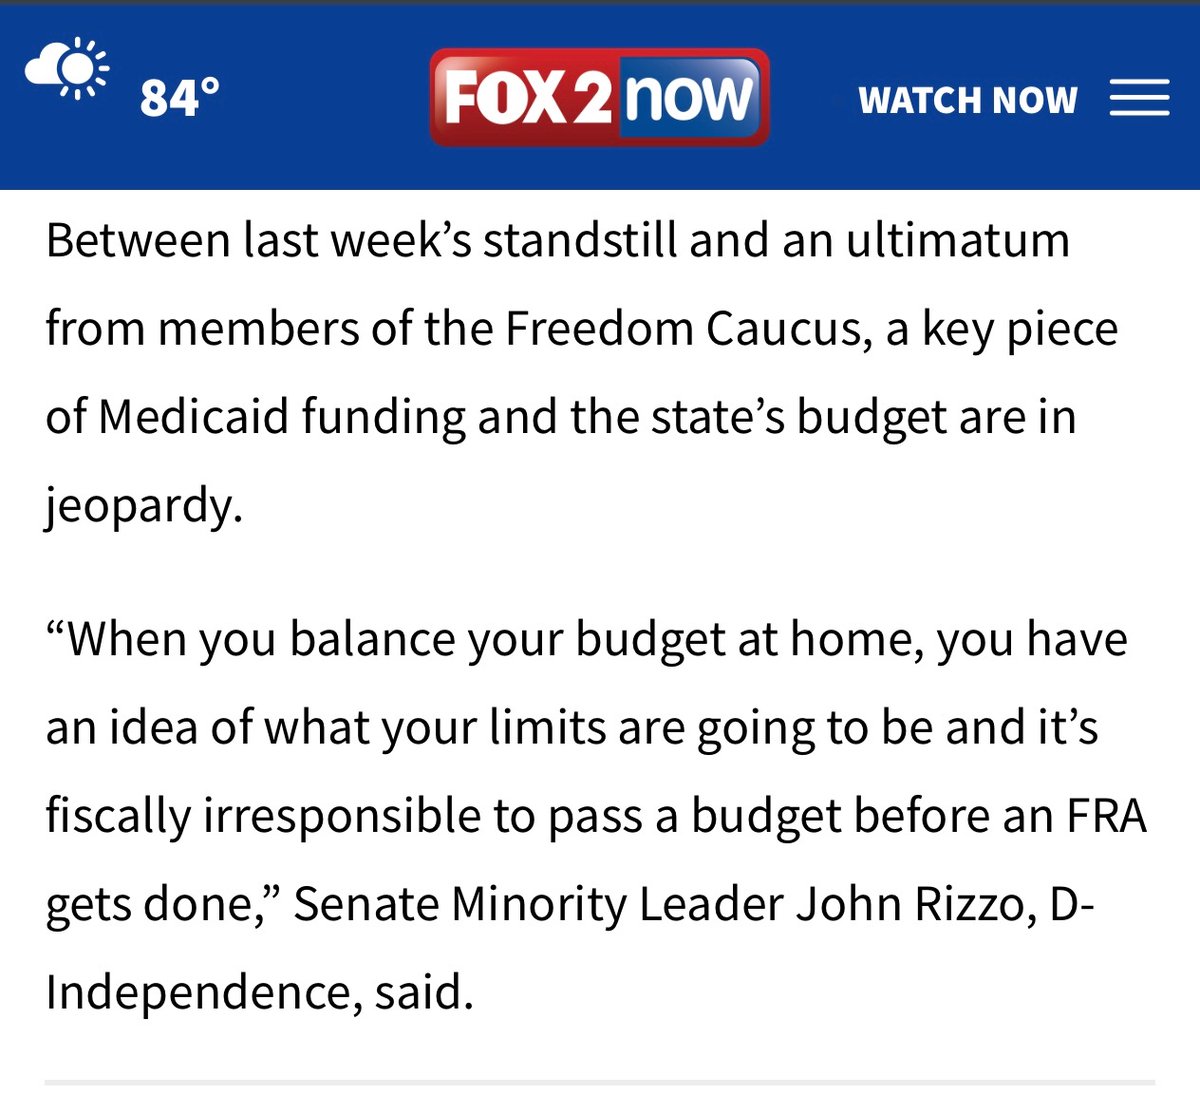 Missouri state budget in limbo as legislative deadline nears via @FOX2now : A constitutional deadline is looming over the General Assembly to pass a budget by the end of this week but before that, senators must renew a multi-billion-dollar tax. #moleg